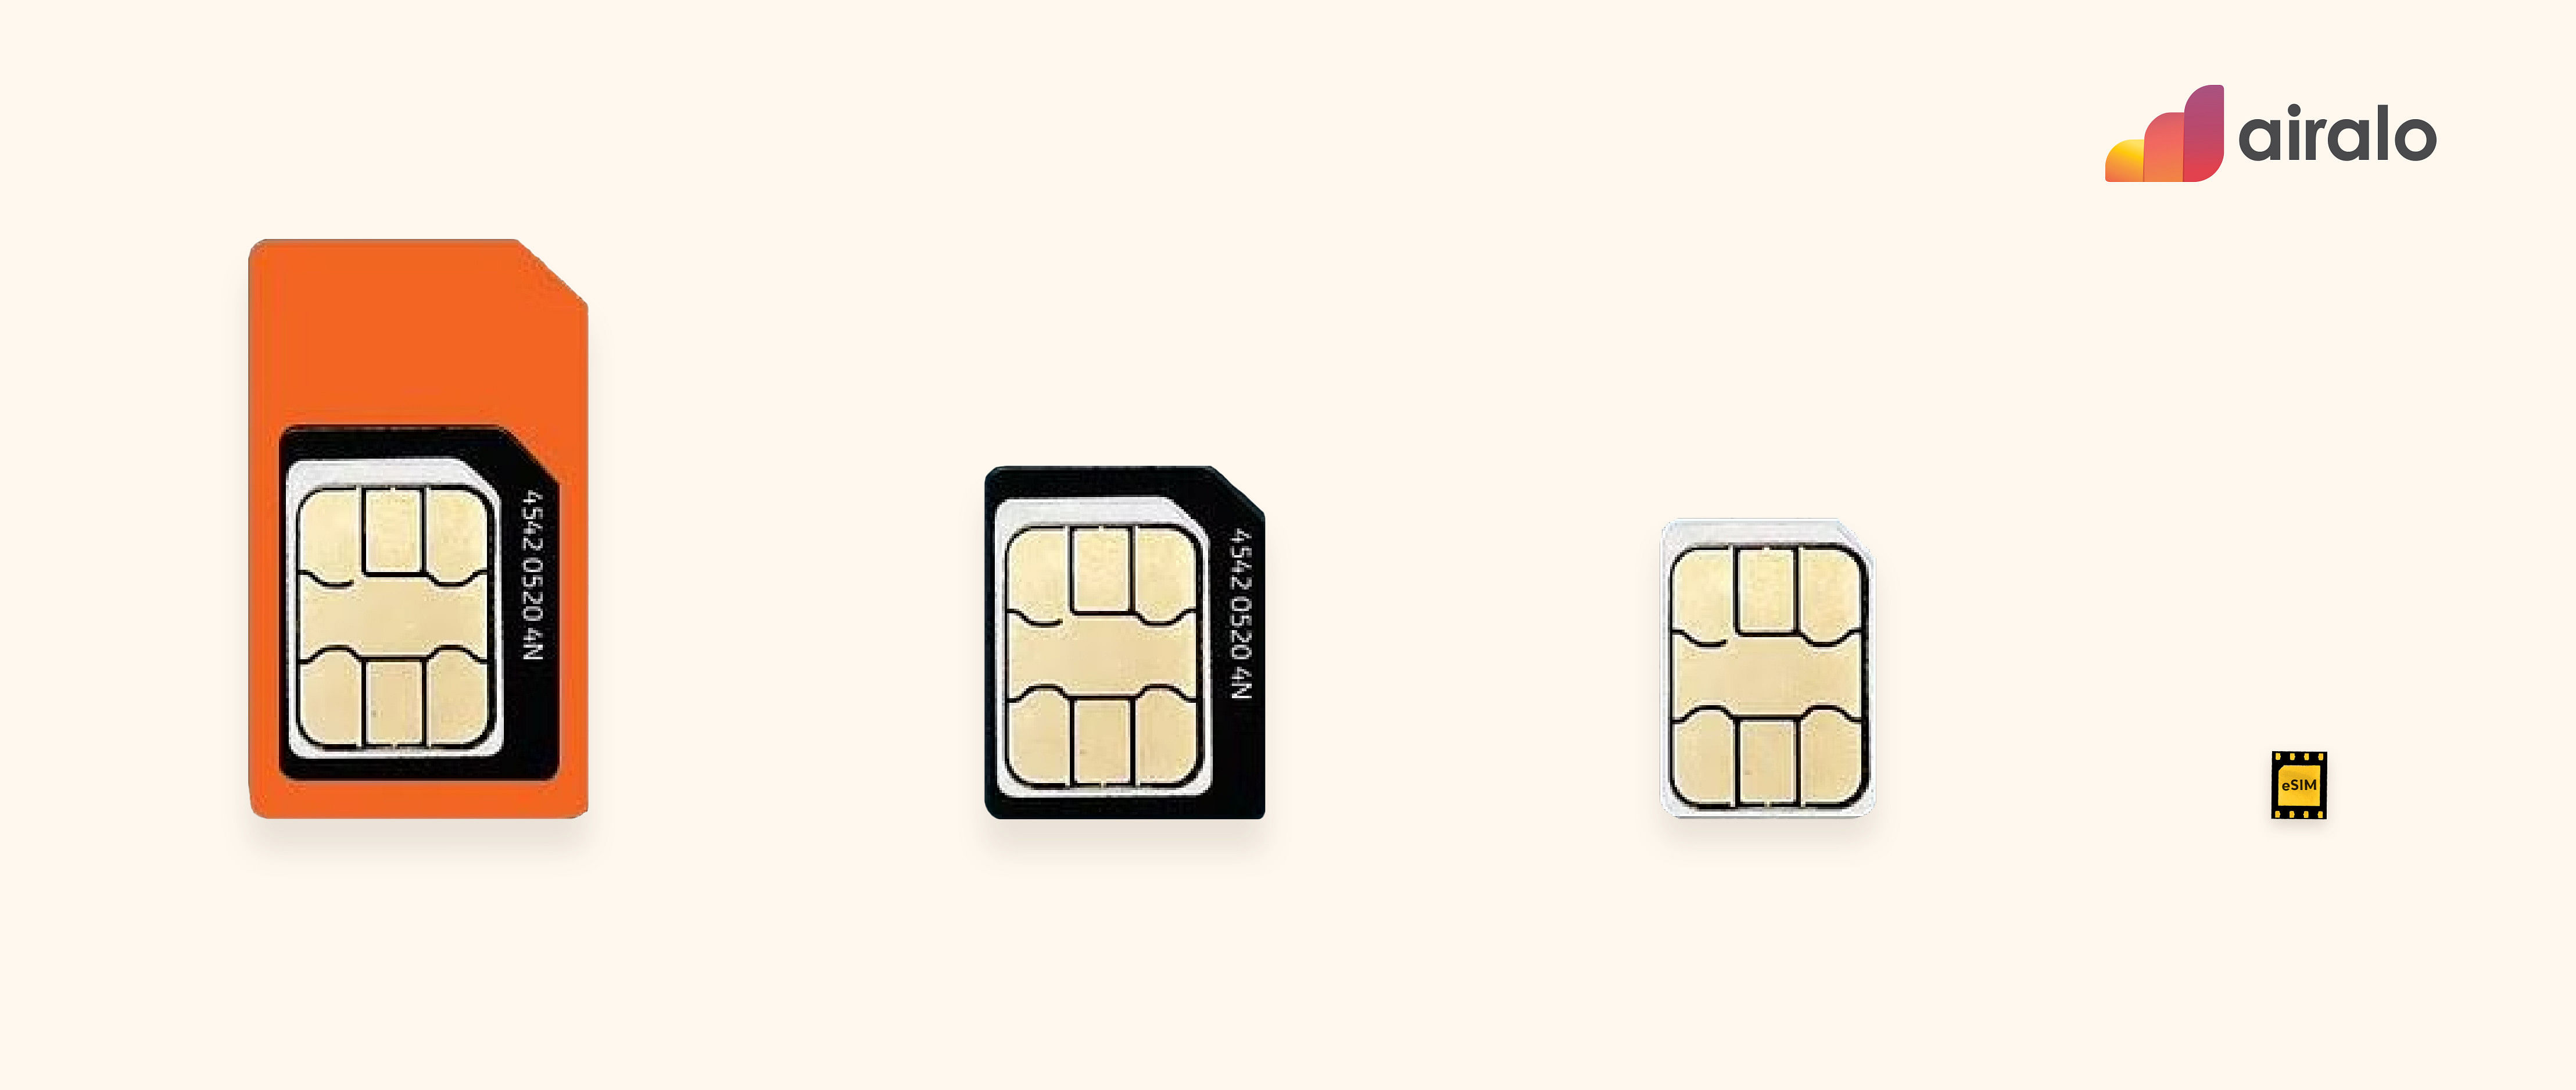 Is SIM-only a good idea?